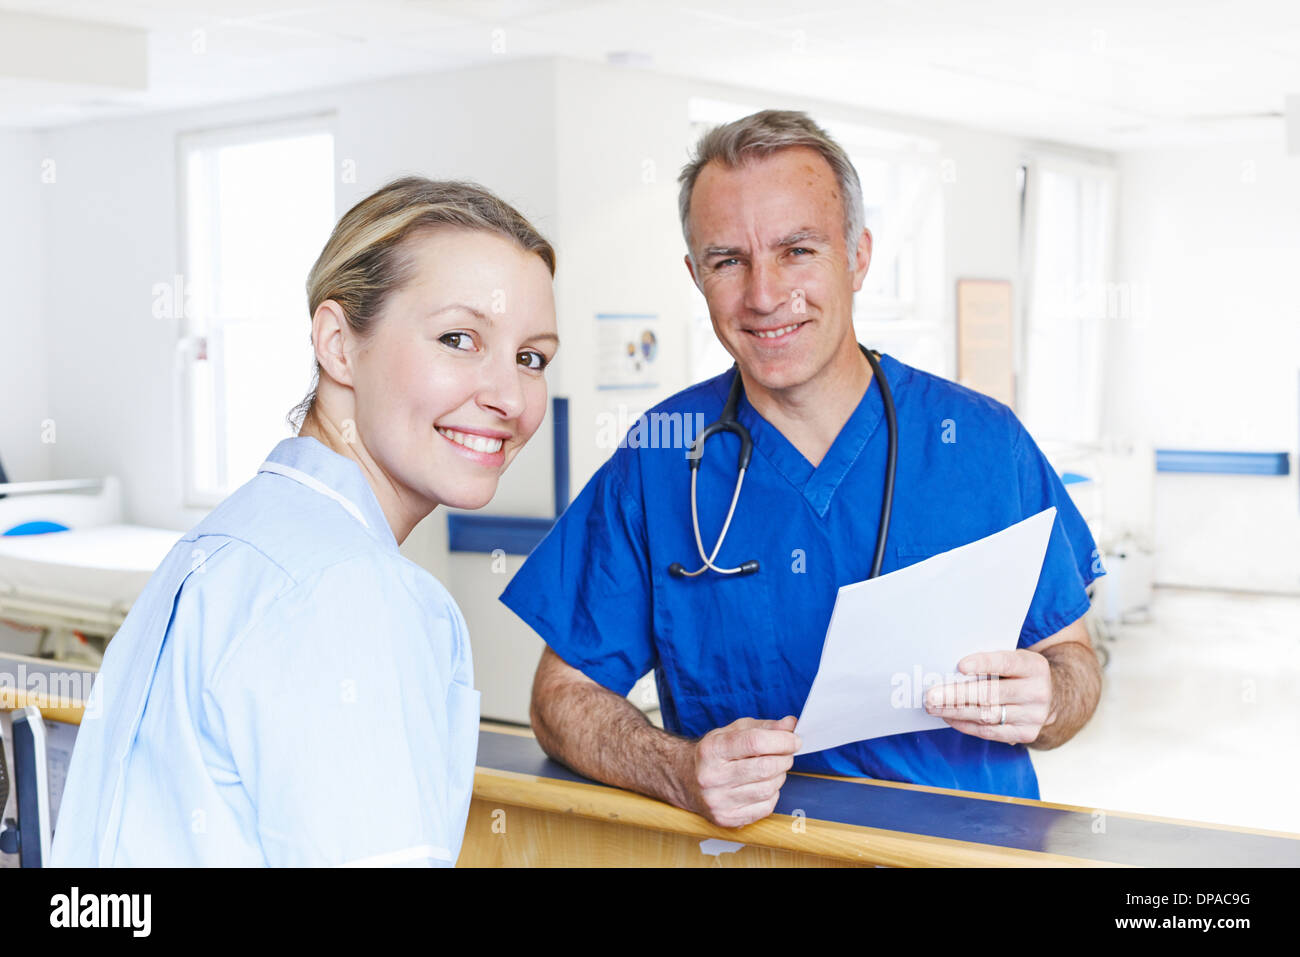 Doctor and nurse looking at camera Banque D'Images